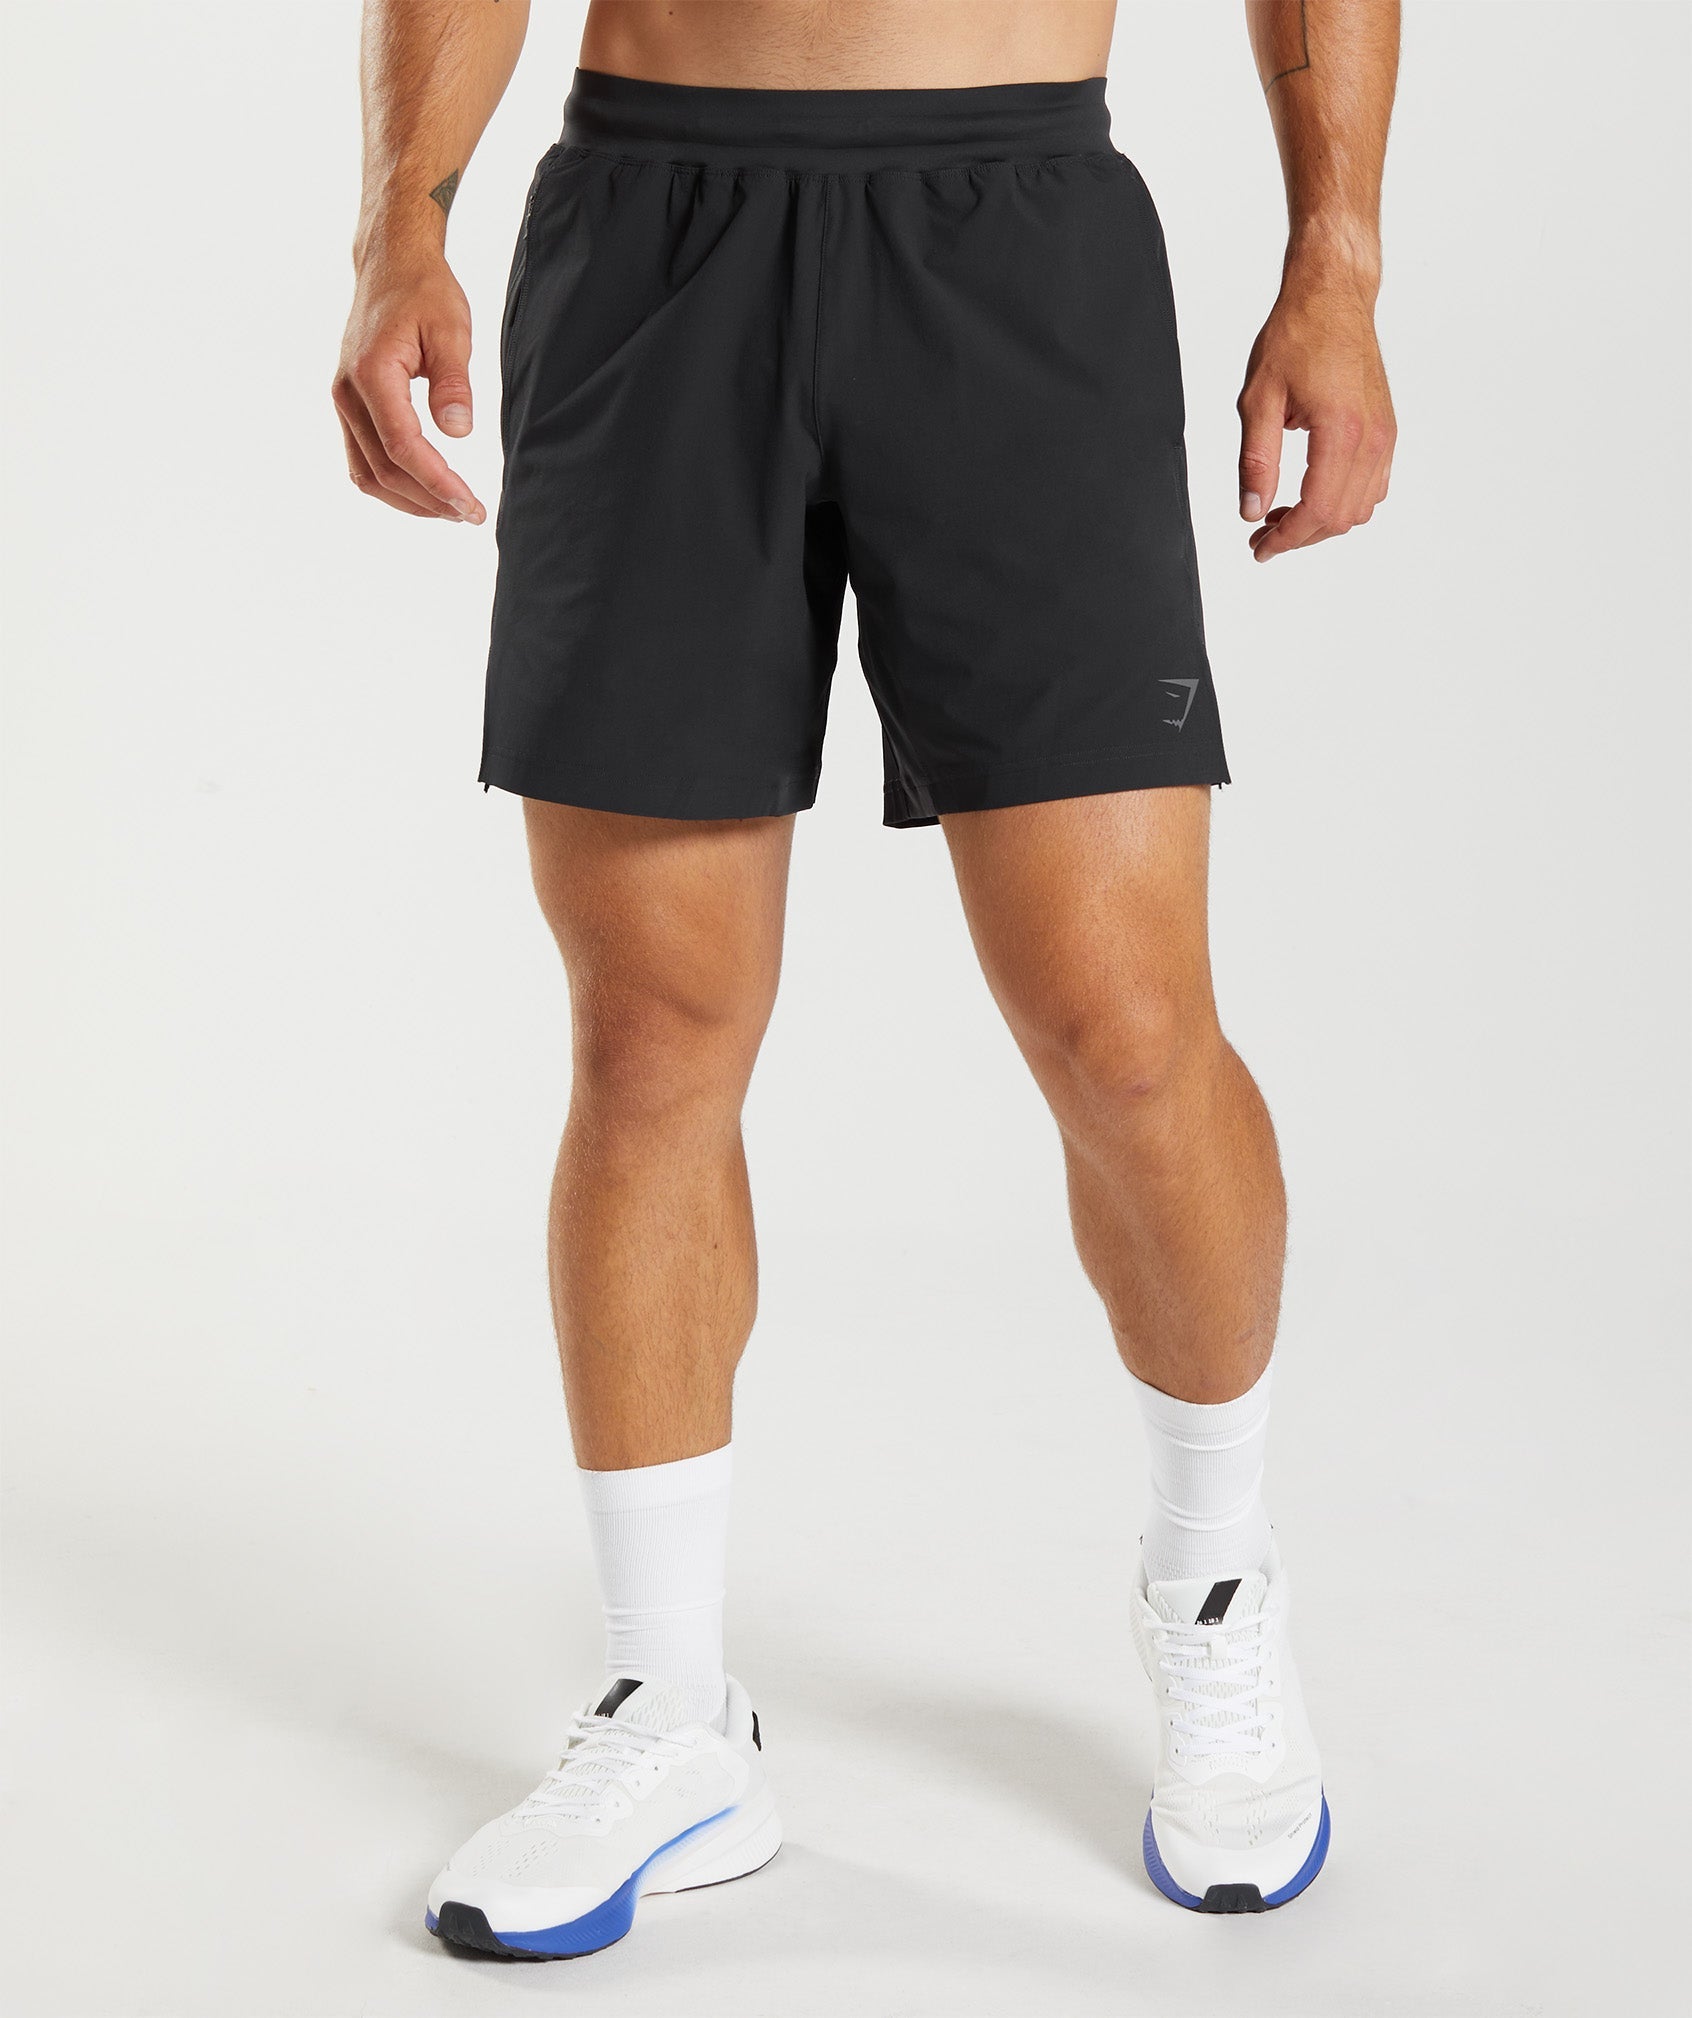 Apex 8" Function Shorts in Black - view 1